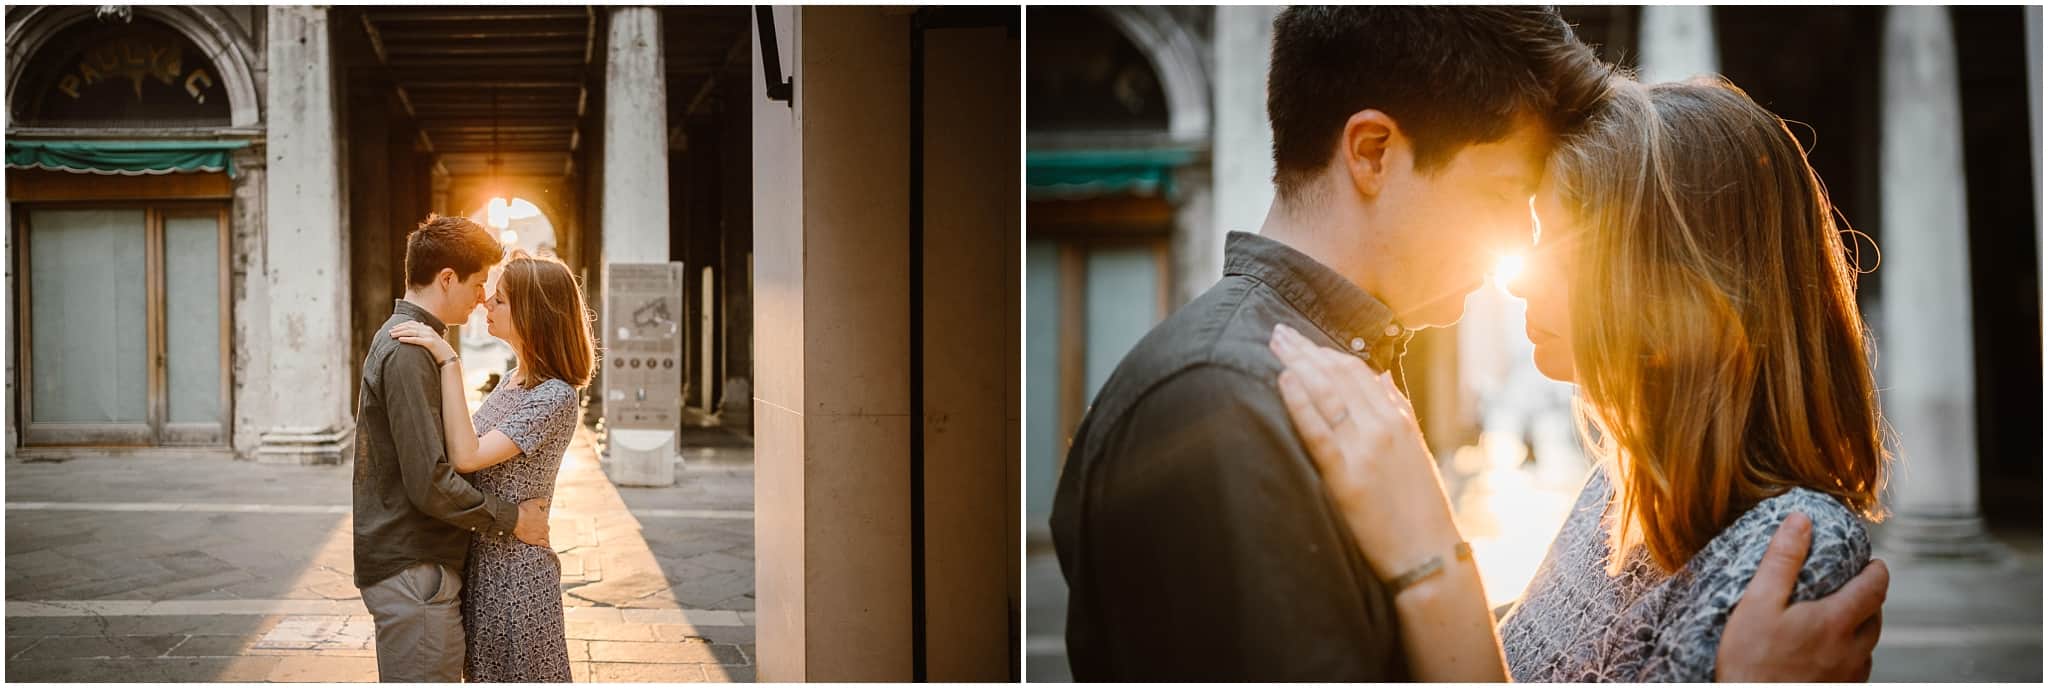 Sunrise engagement photo shoot in Venice by photographers Ludovica Lanzafami and Valerio Elia